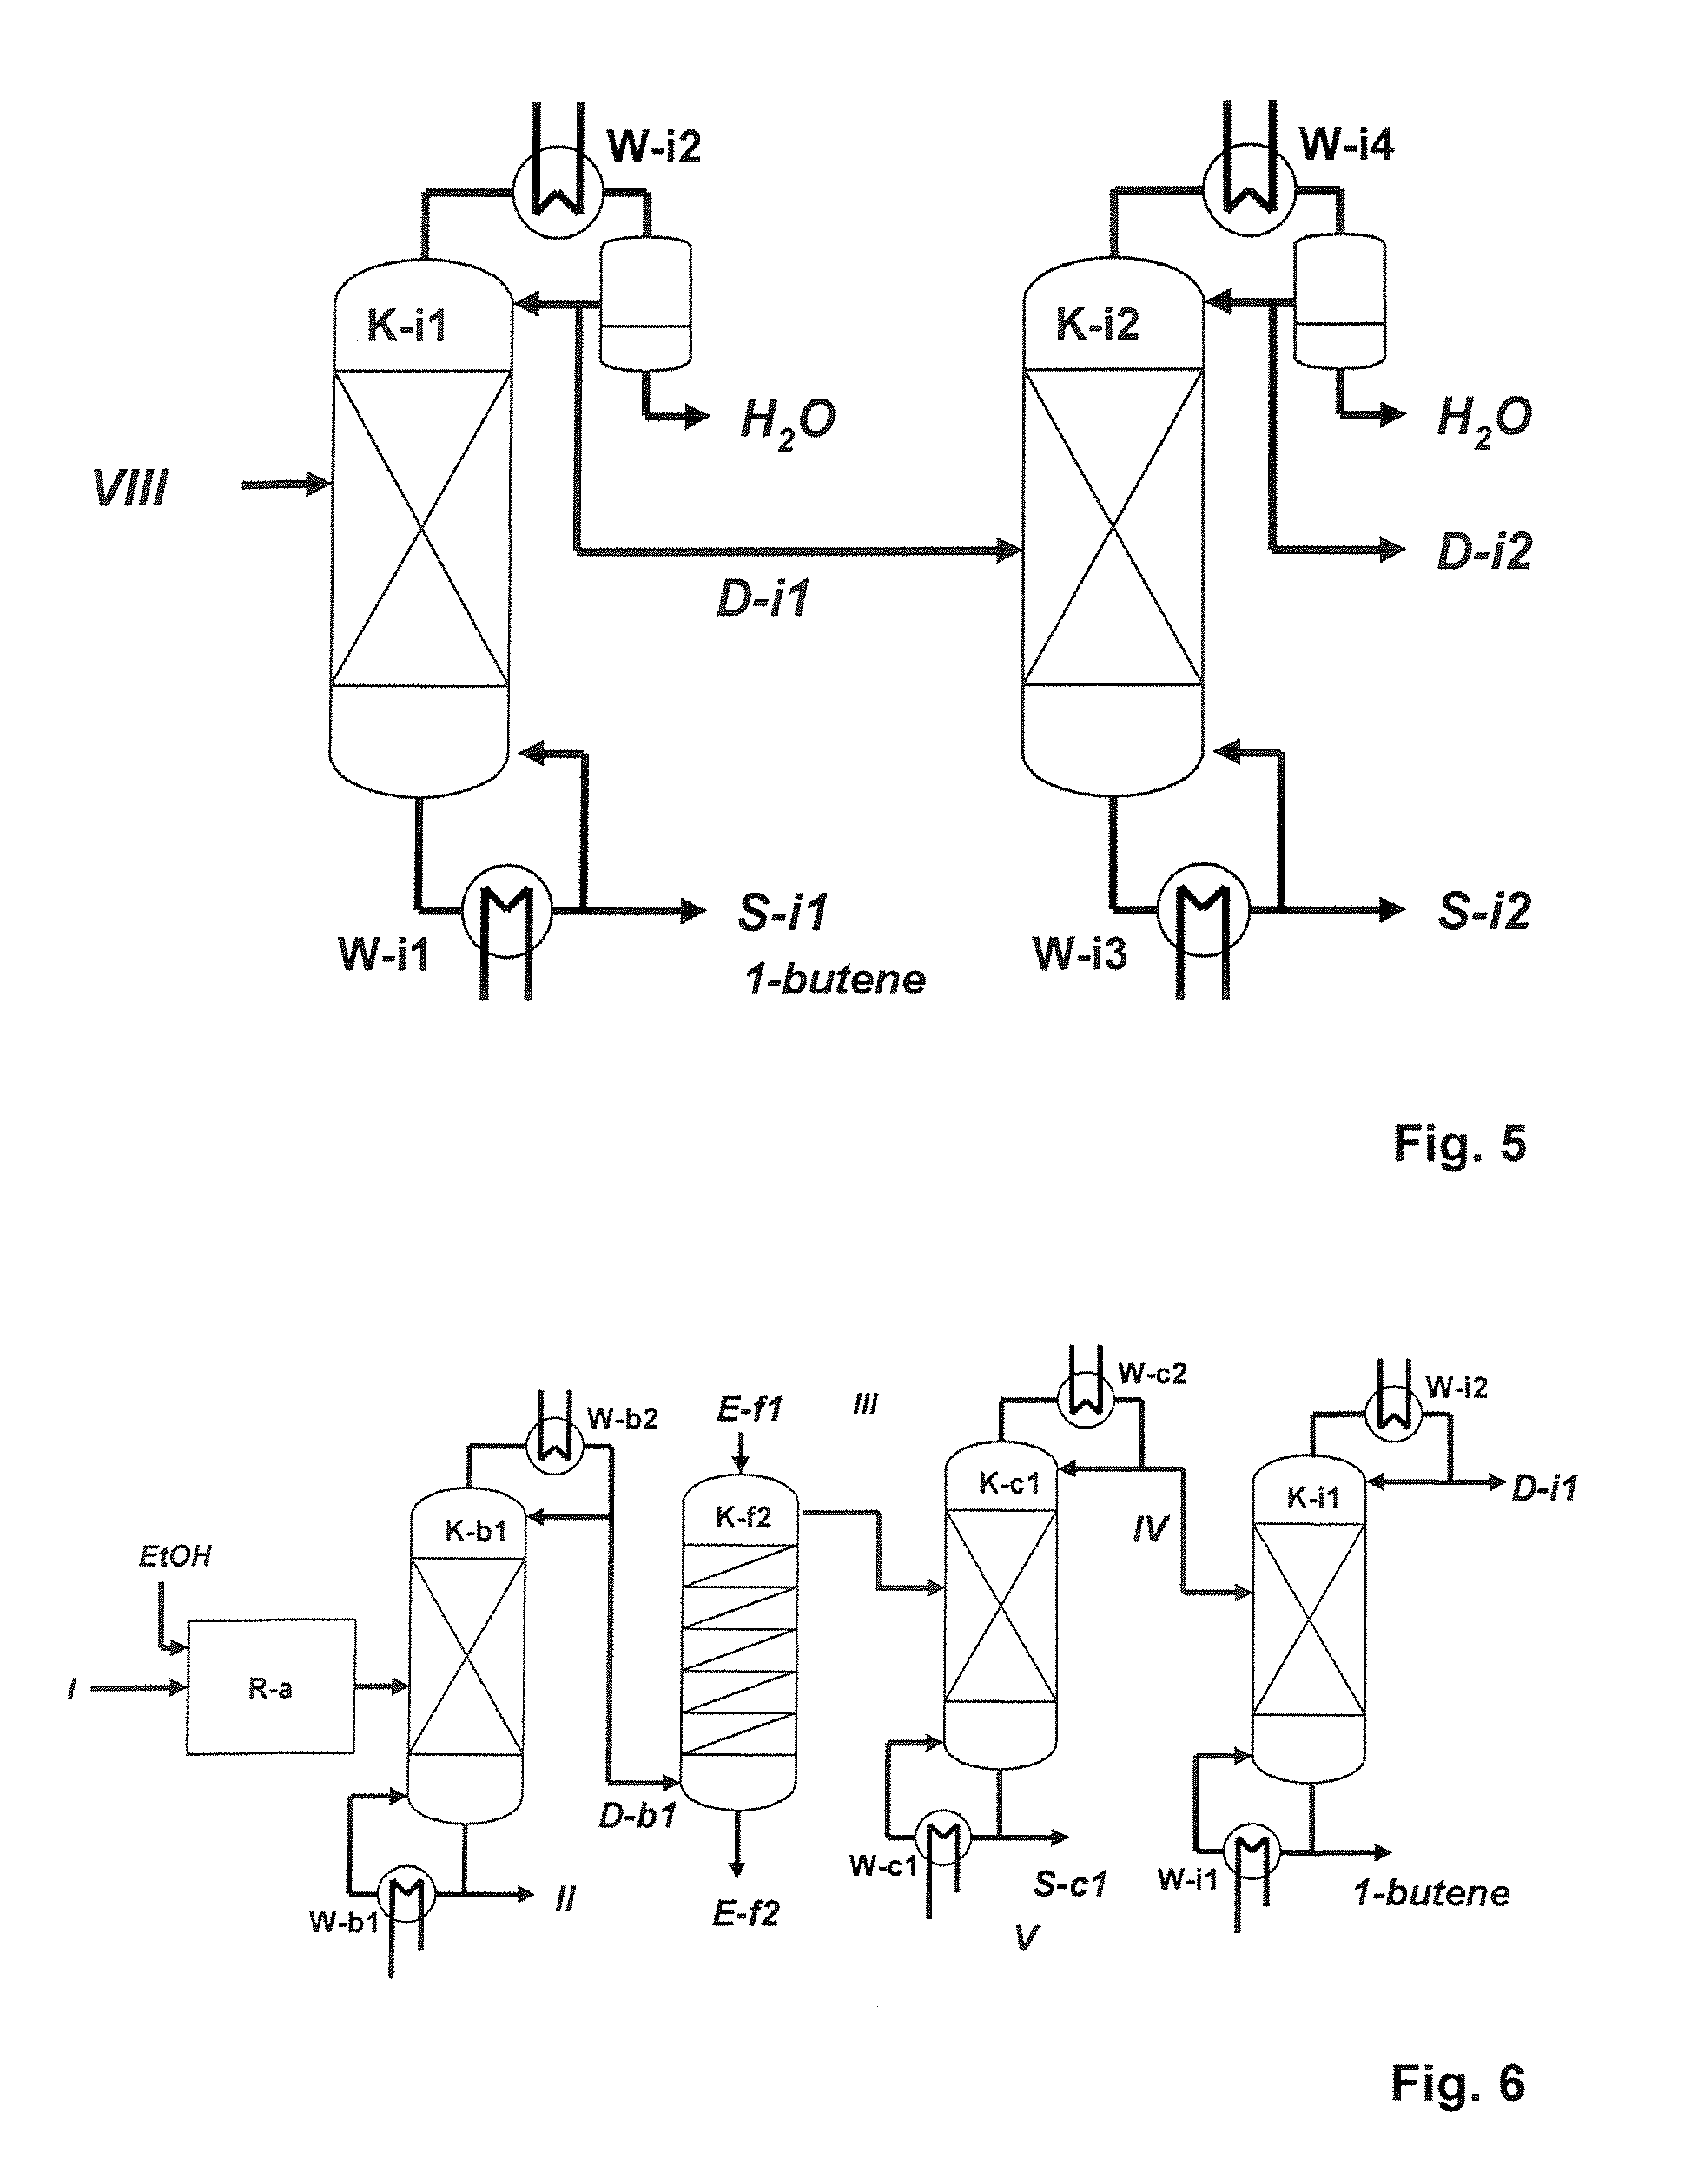 Process for preparing ethyl tert-butyl ether from technical mixtures of C4 hydrocarbons